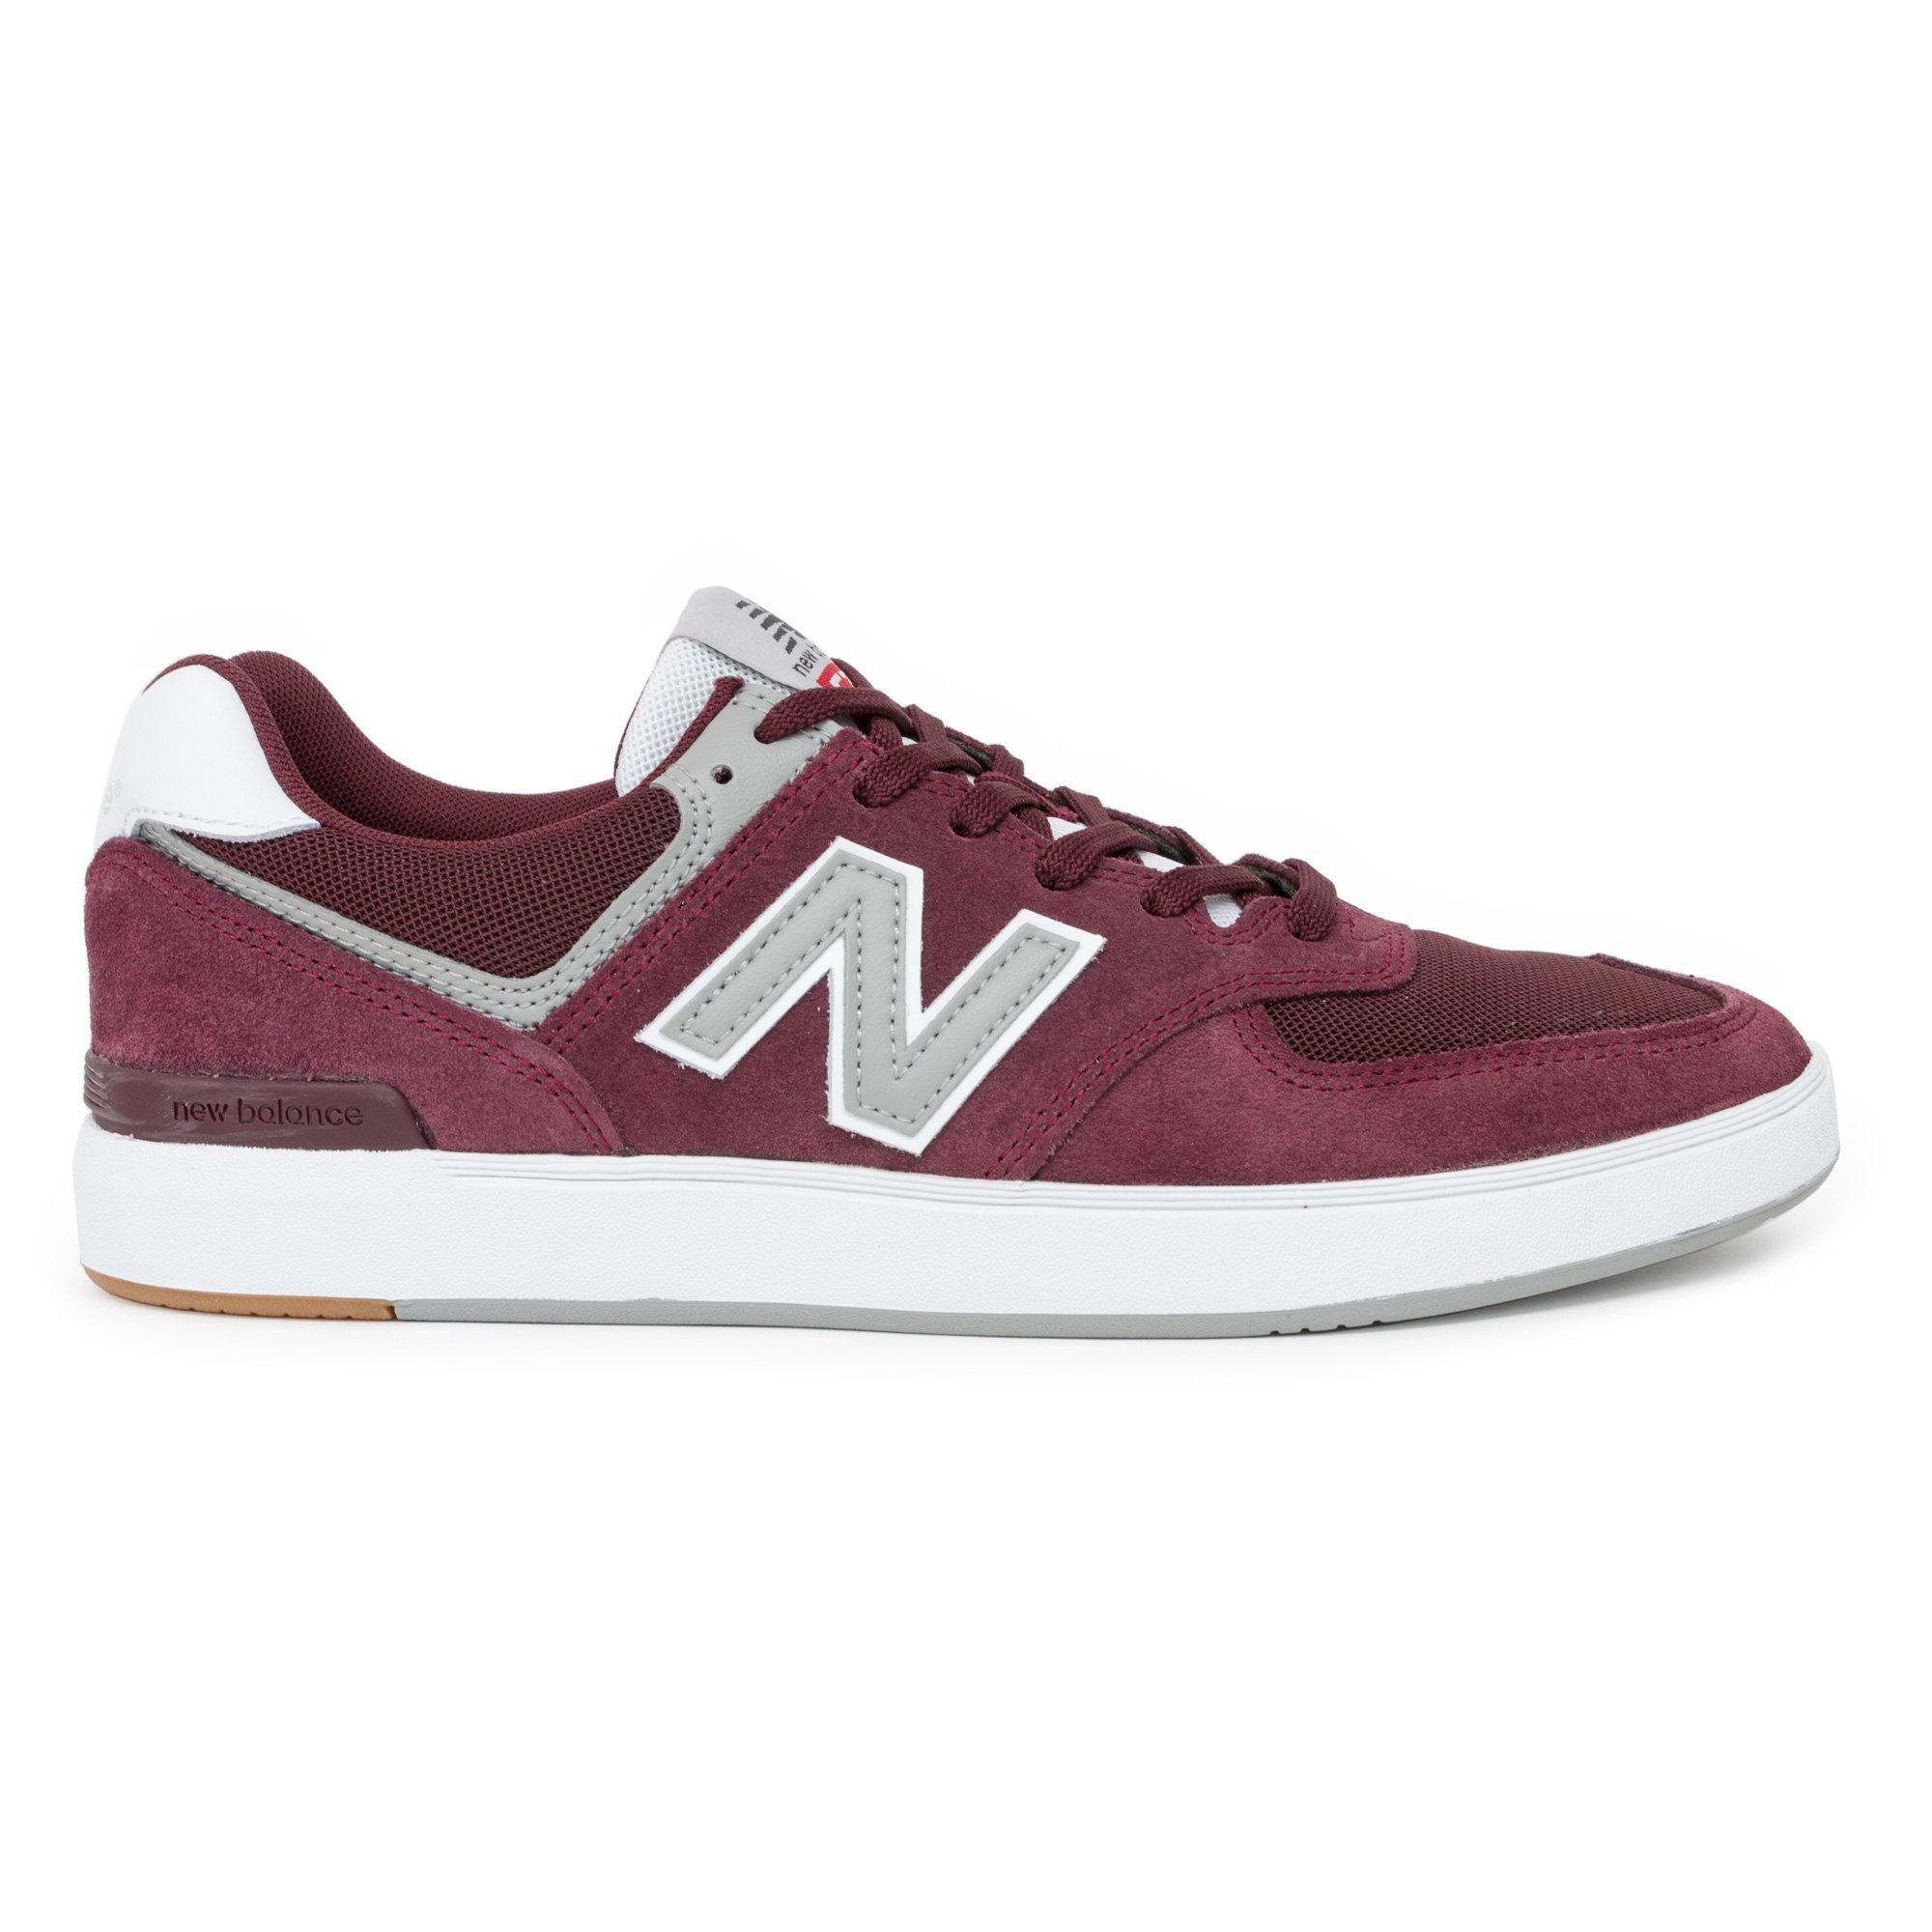 New Balance Am574 Shoes in Burgundy (Purple) for Men - Lyst